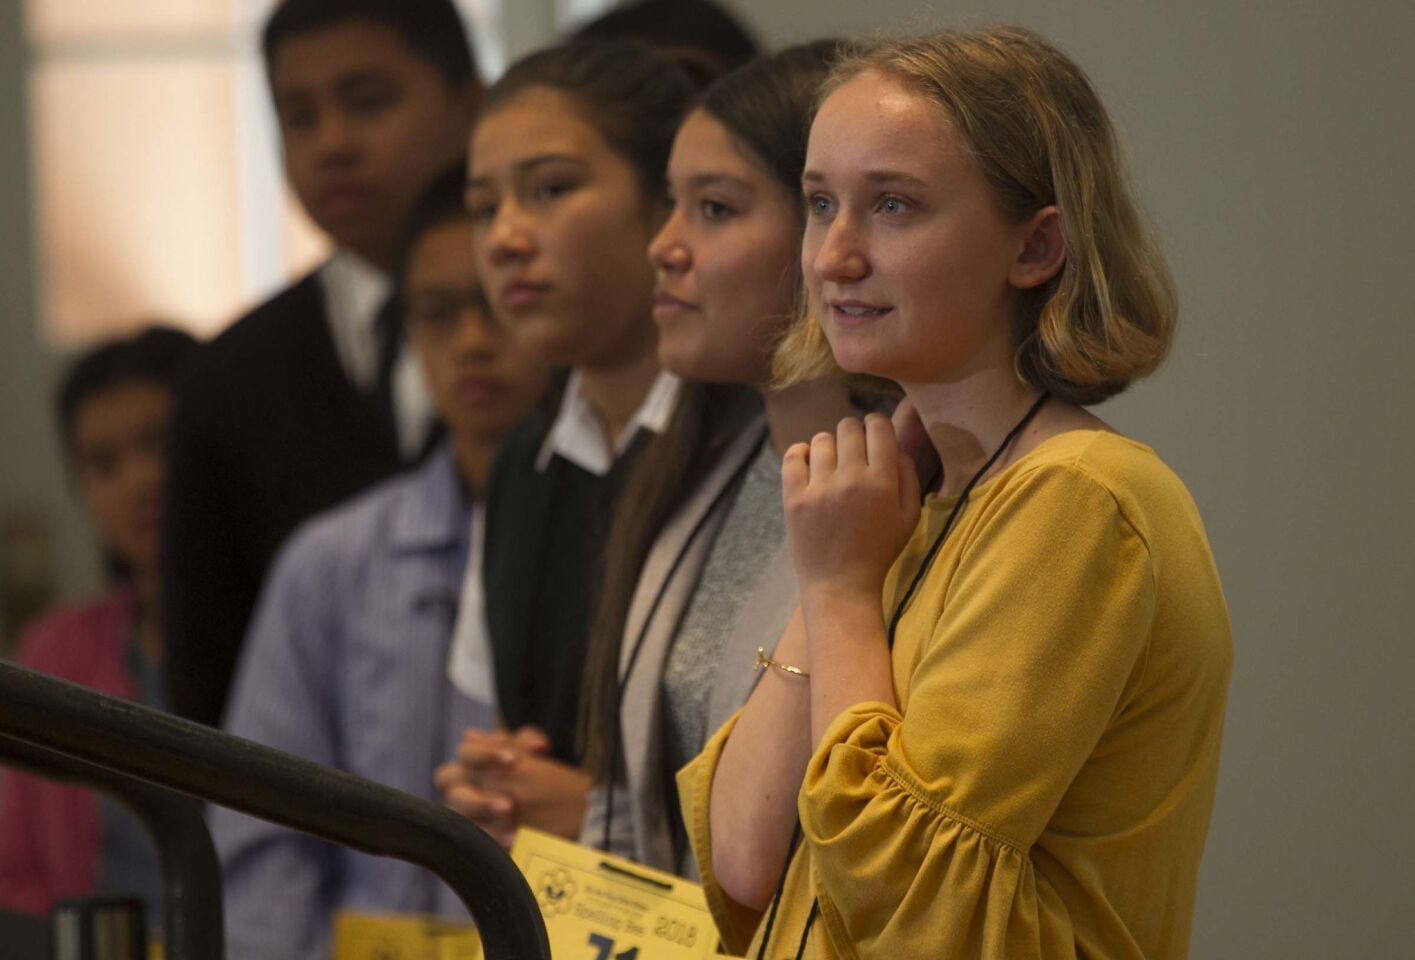 Camille Wetherell, right, from San Marcos Middle school was the next speller in line at the 49th annual San Diego Union-Tribune county wide spelling bee held at Liberty Station.